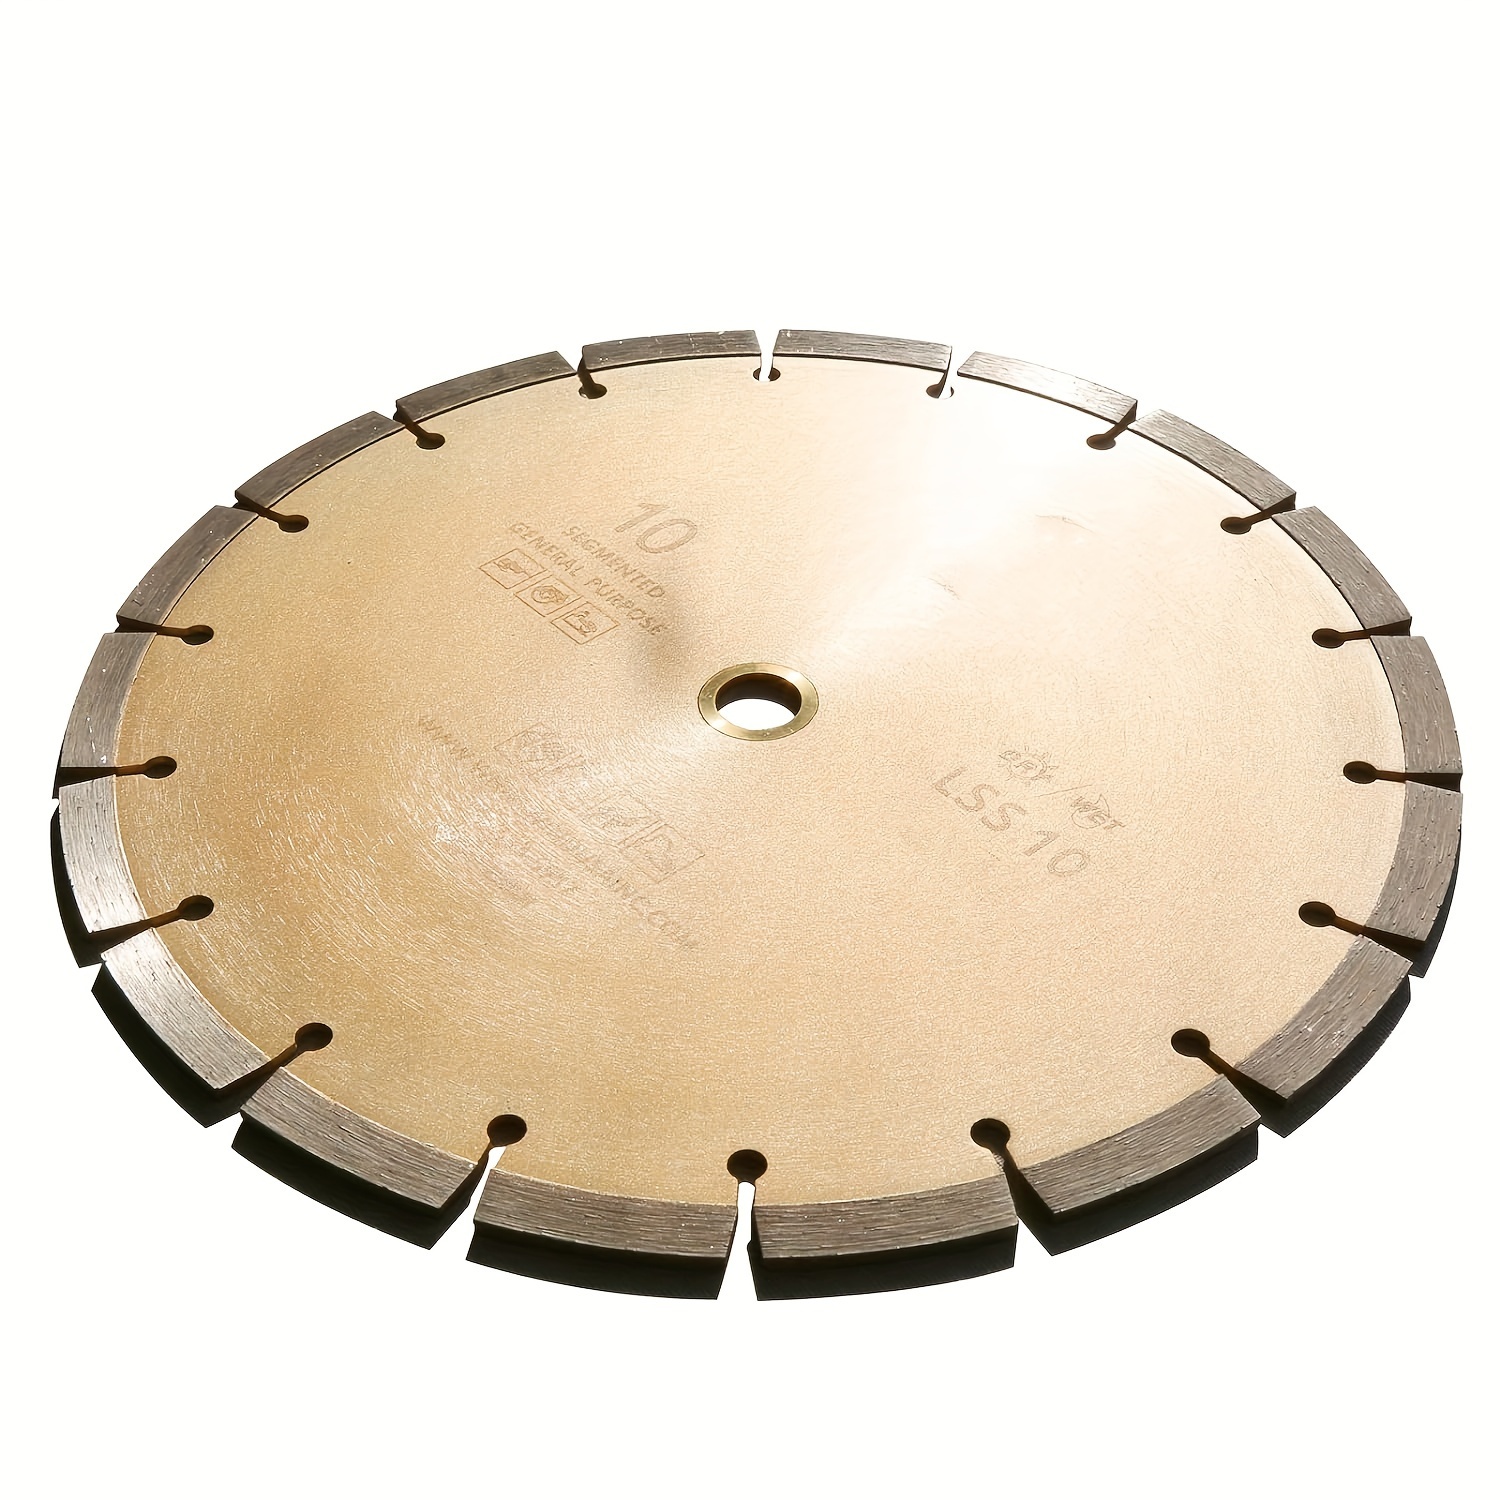 

10 Inch Diamond Concrete Saw Blade, 10 Inch Masonry Blade With 5/8 Inch Arbor, Sharp Tile Saw Blade Dry Or Wet Cutting For Brick Paves Concrete Stone Block Marble Granite